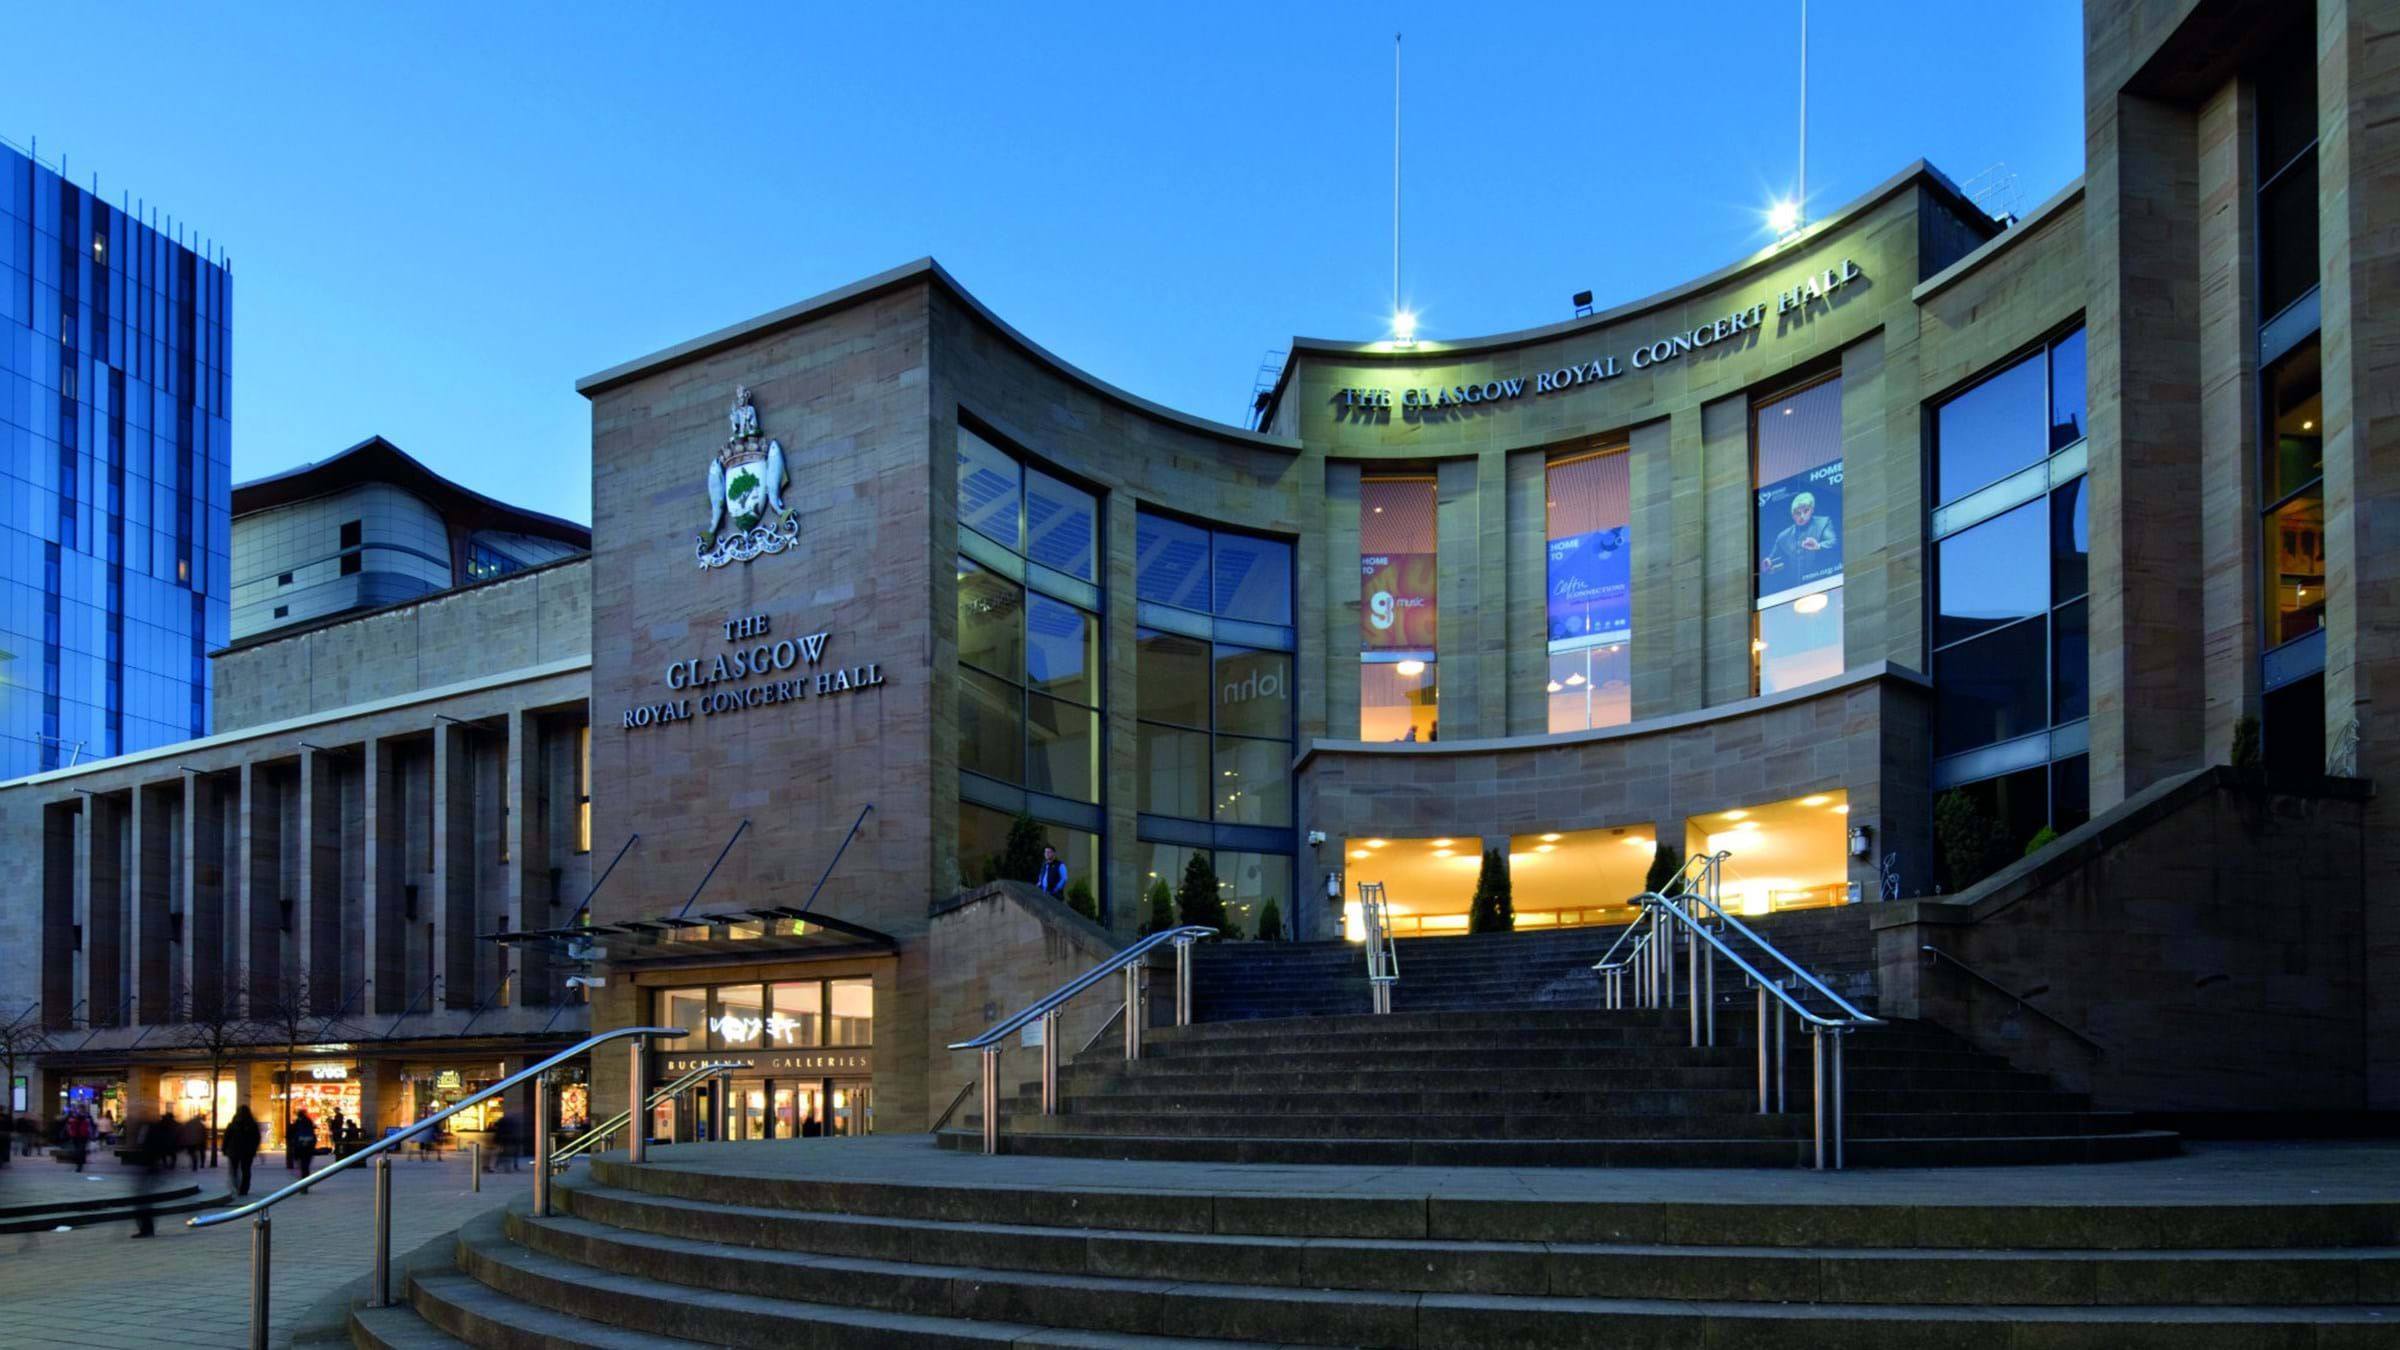 13-astounding-facts-about-glasgow-royal-concert-hall